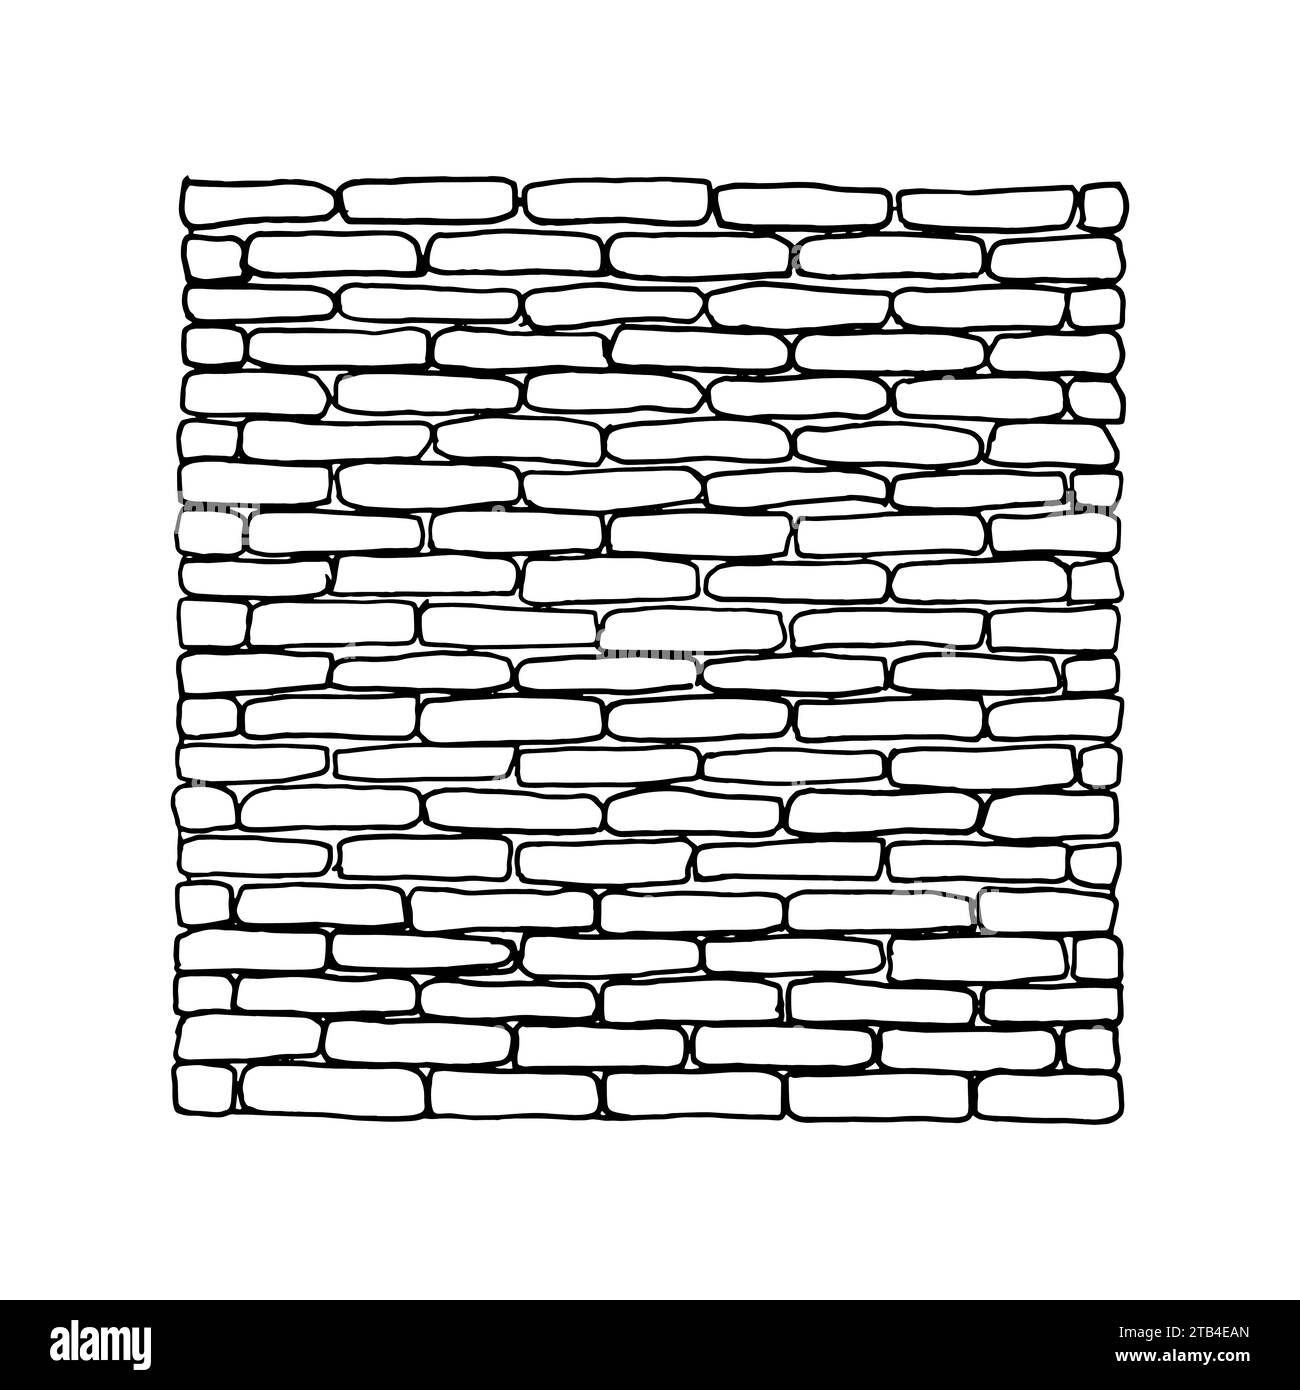 Background with an texture old white painted brick wall graphic. Interior in loft style. Black contour linear silhouette. Vector graphics outline Stock Vector